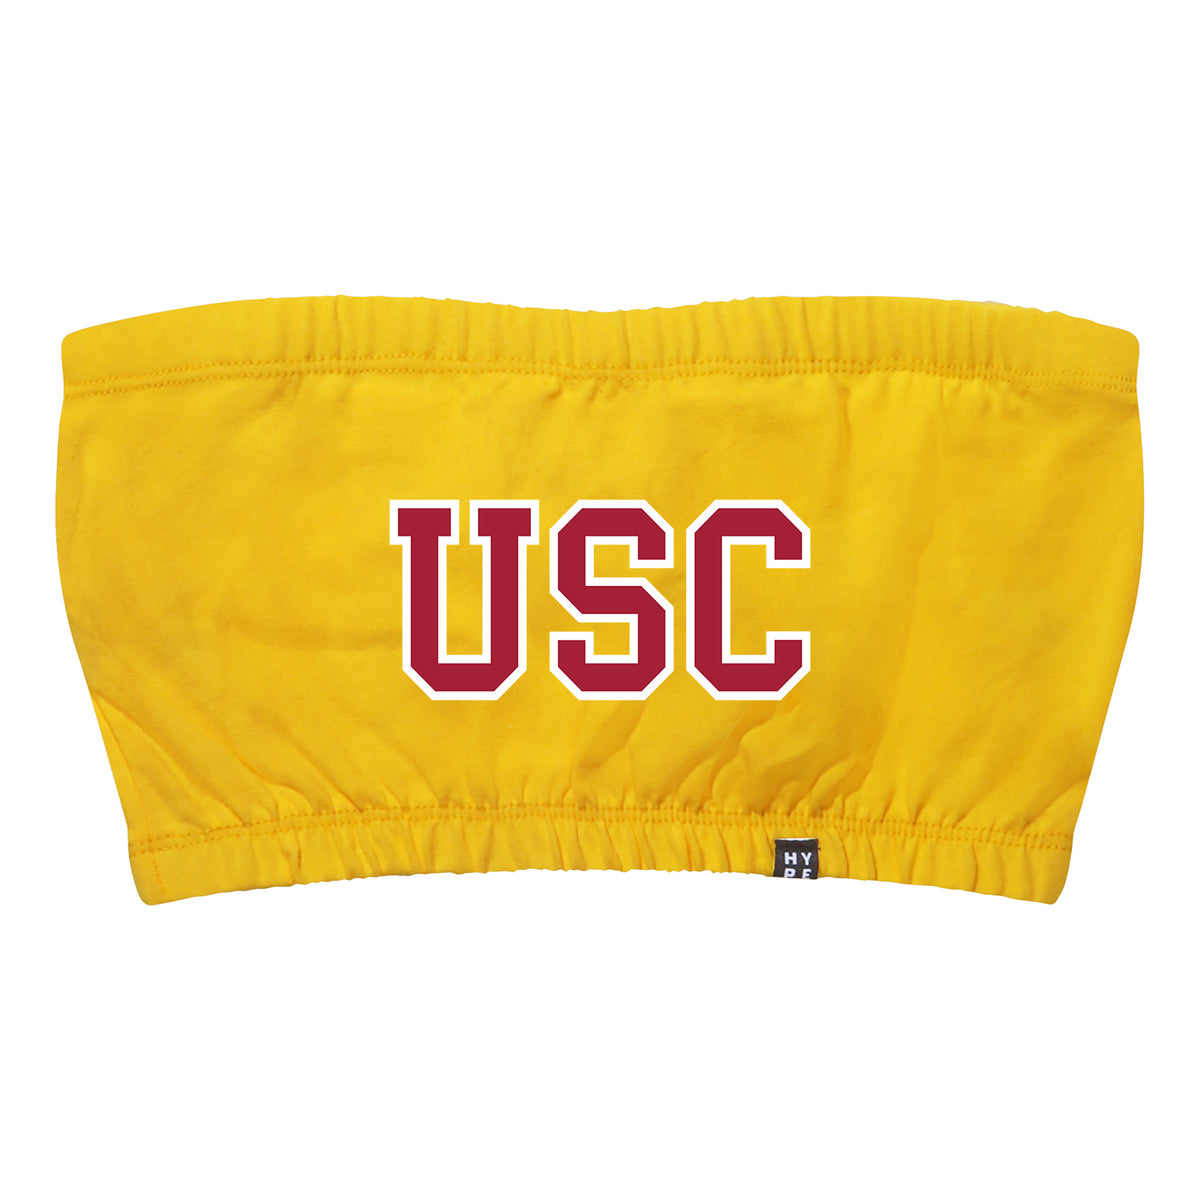 University of Southern California Bandeau Top